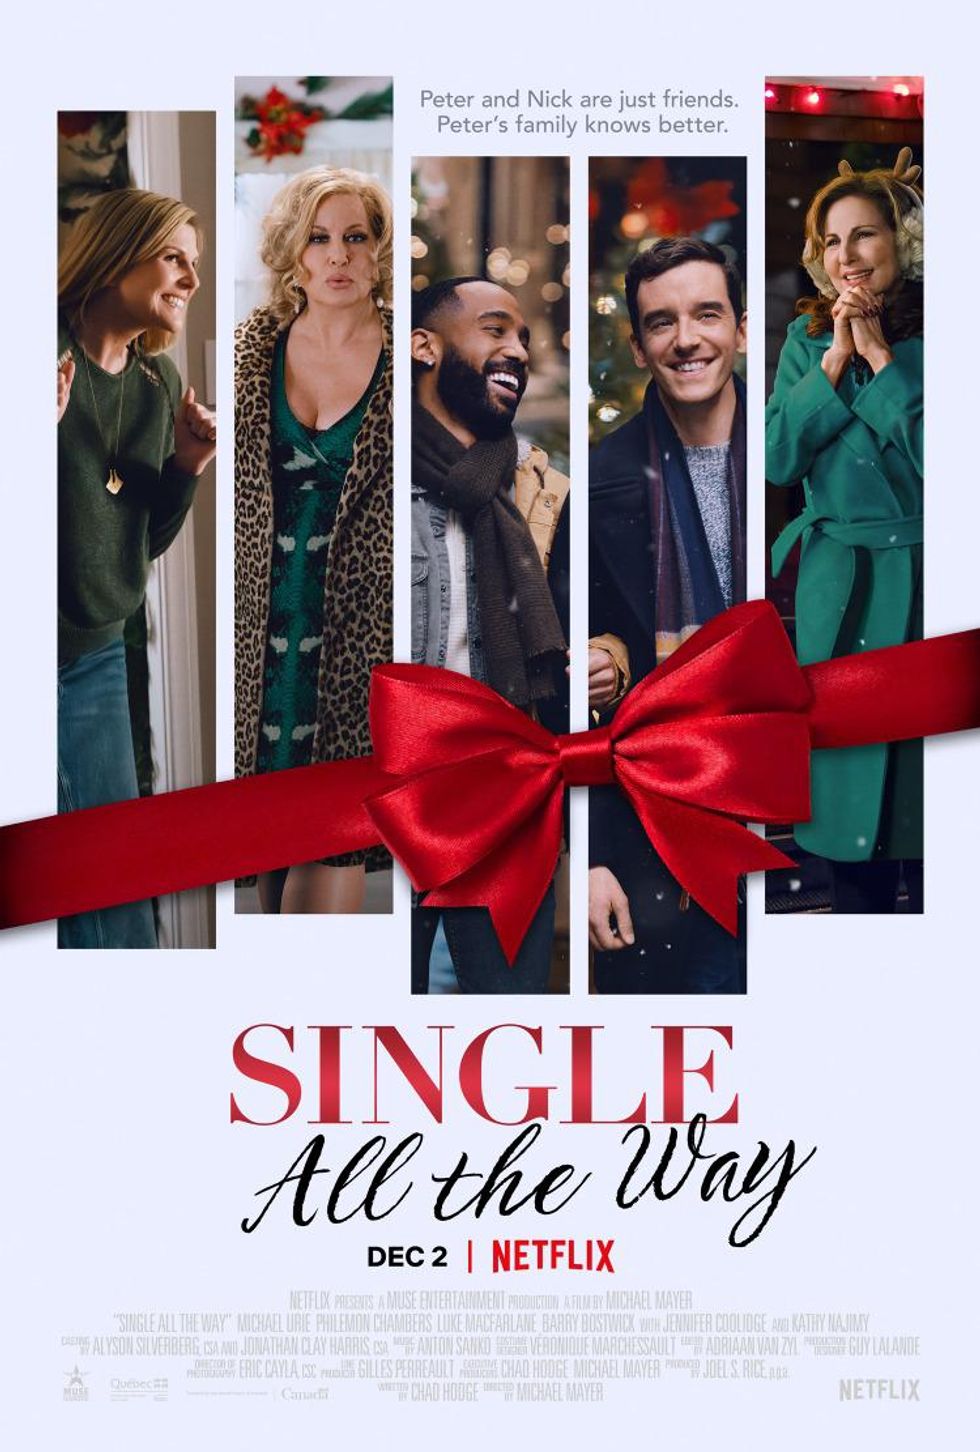 Watch the Trailer for Netflix’s Gay Holiday Film 'Single All the Way'